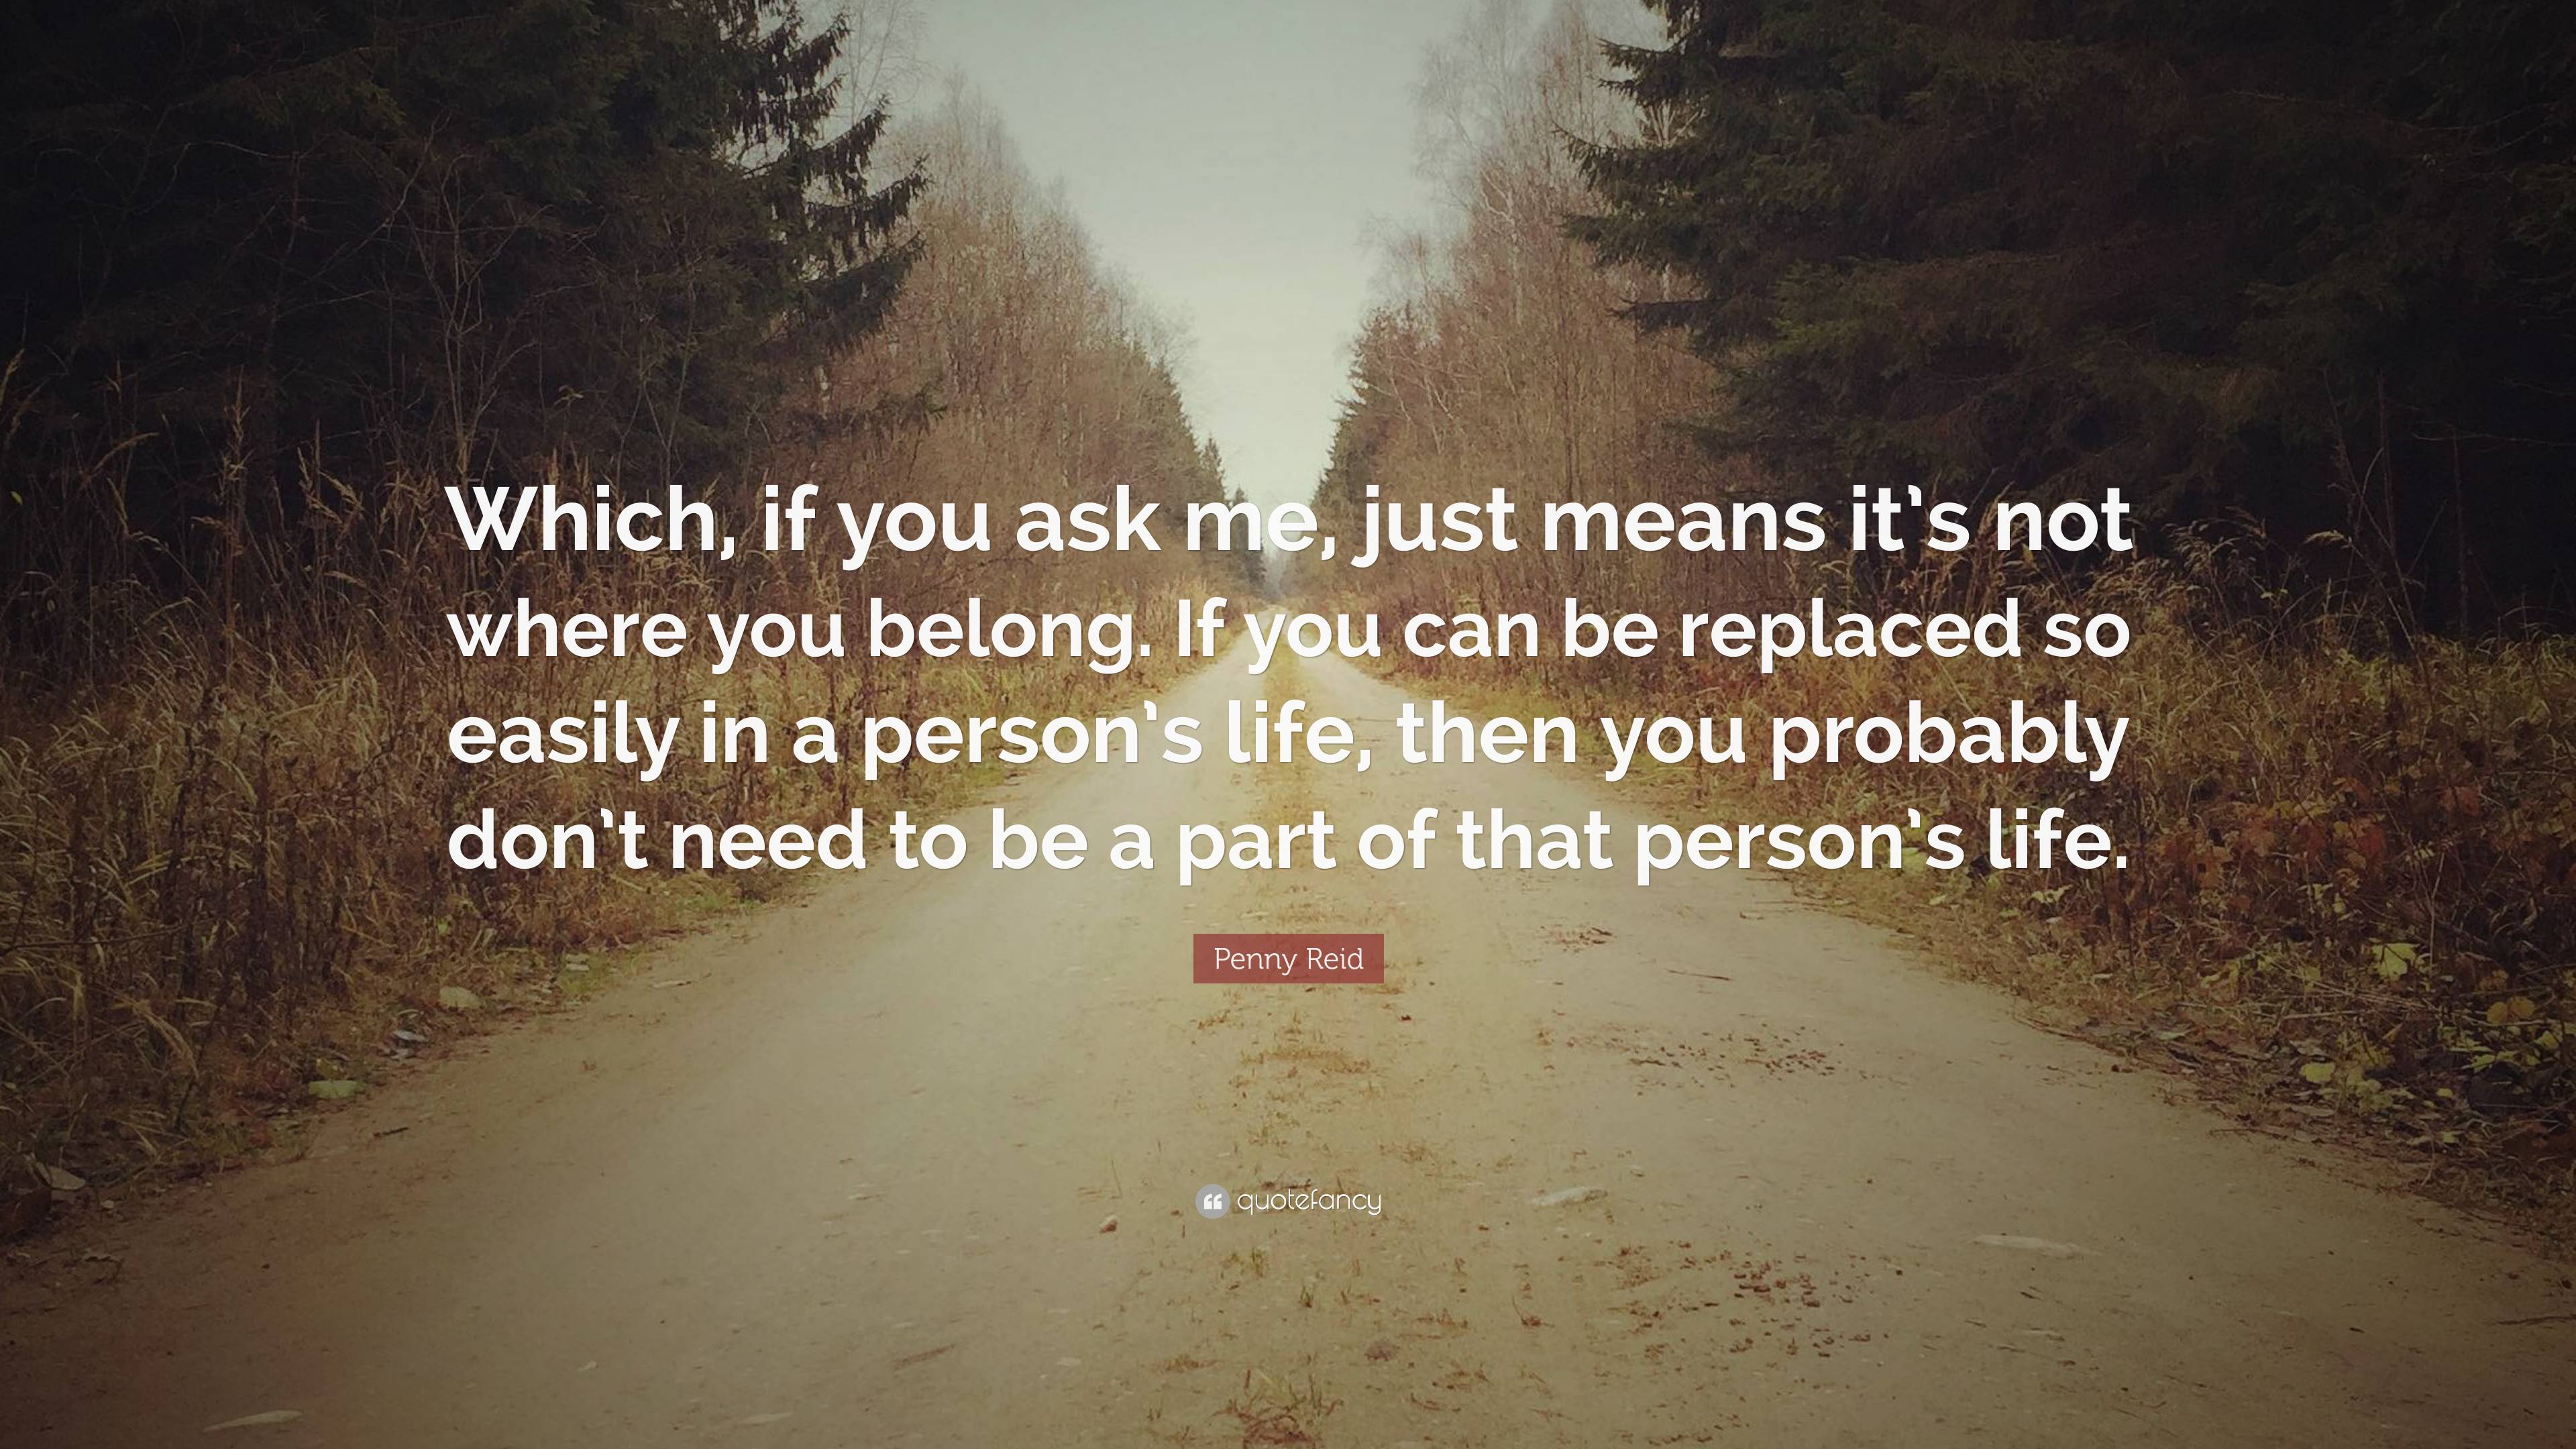 Penny Reid Quote: “Which, if you ask me, just means it’s not where you ...